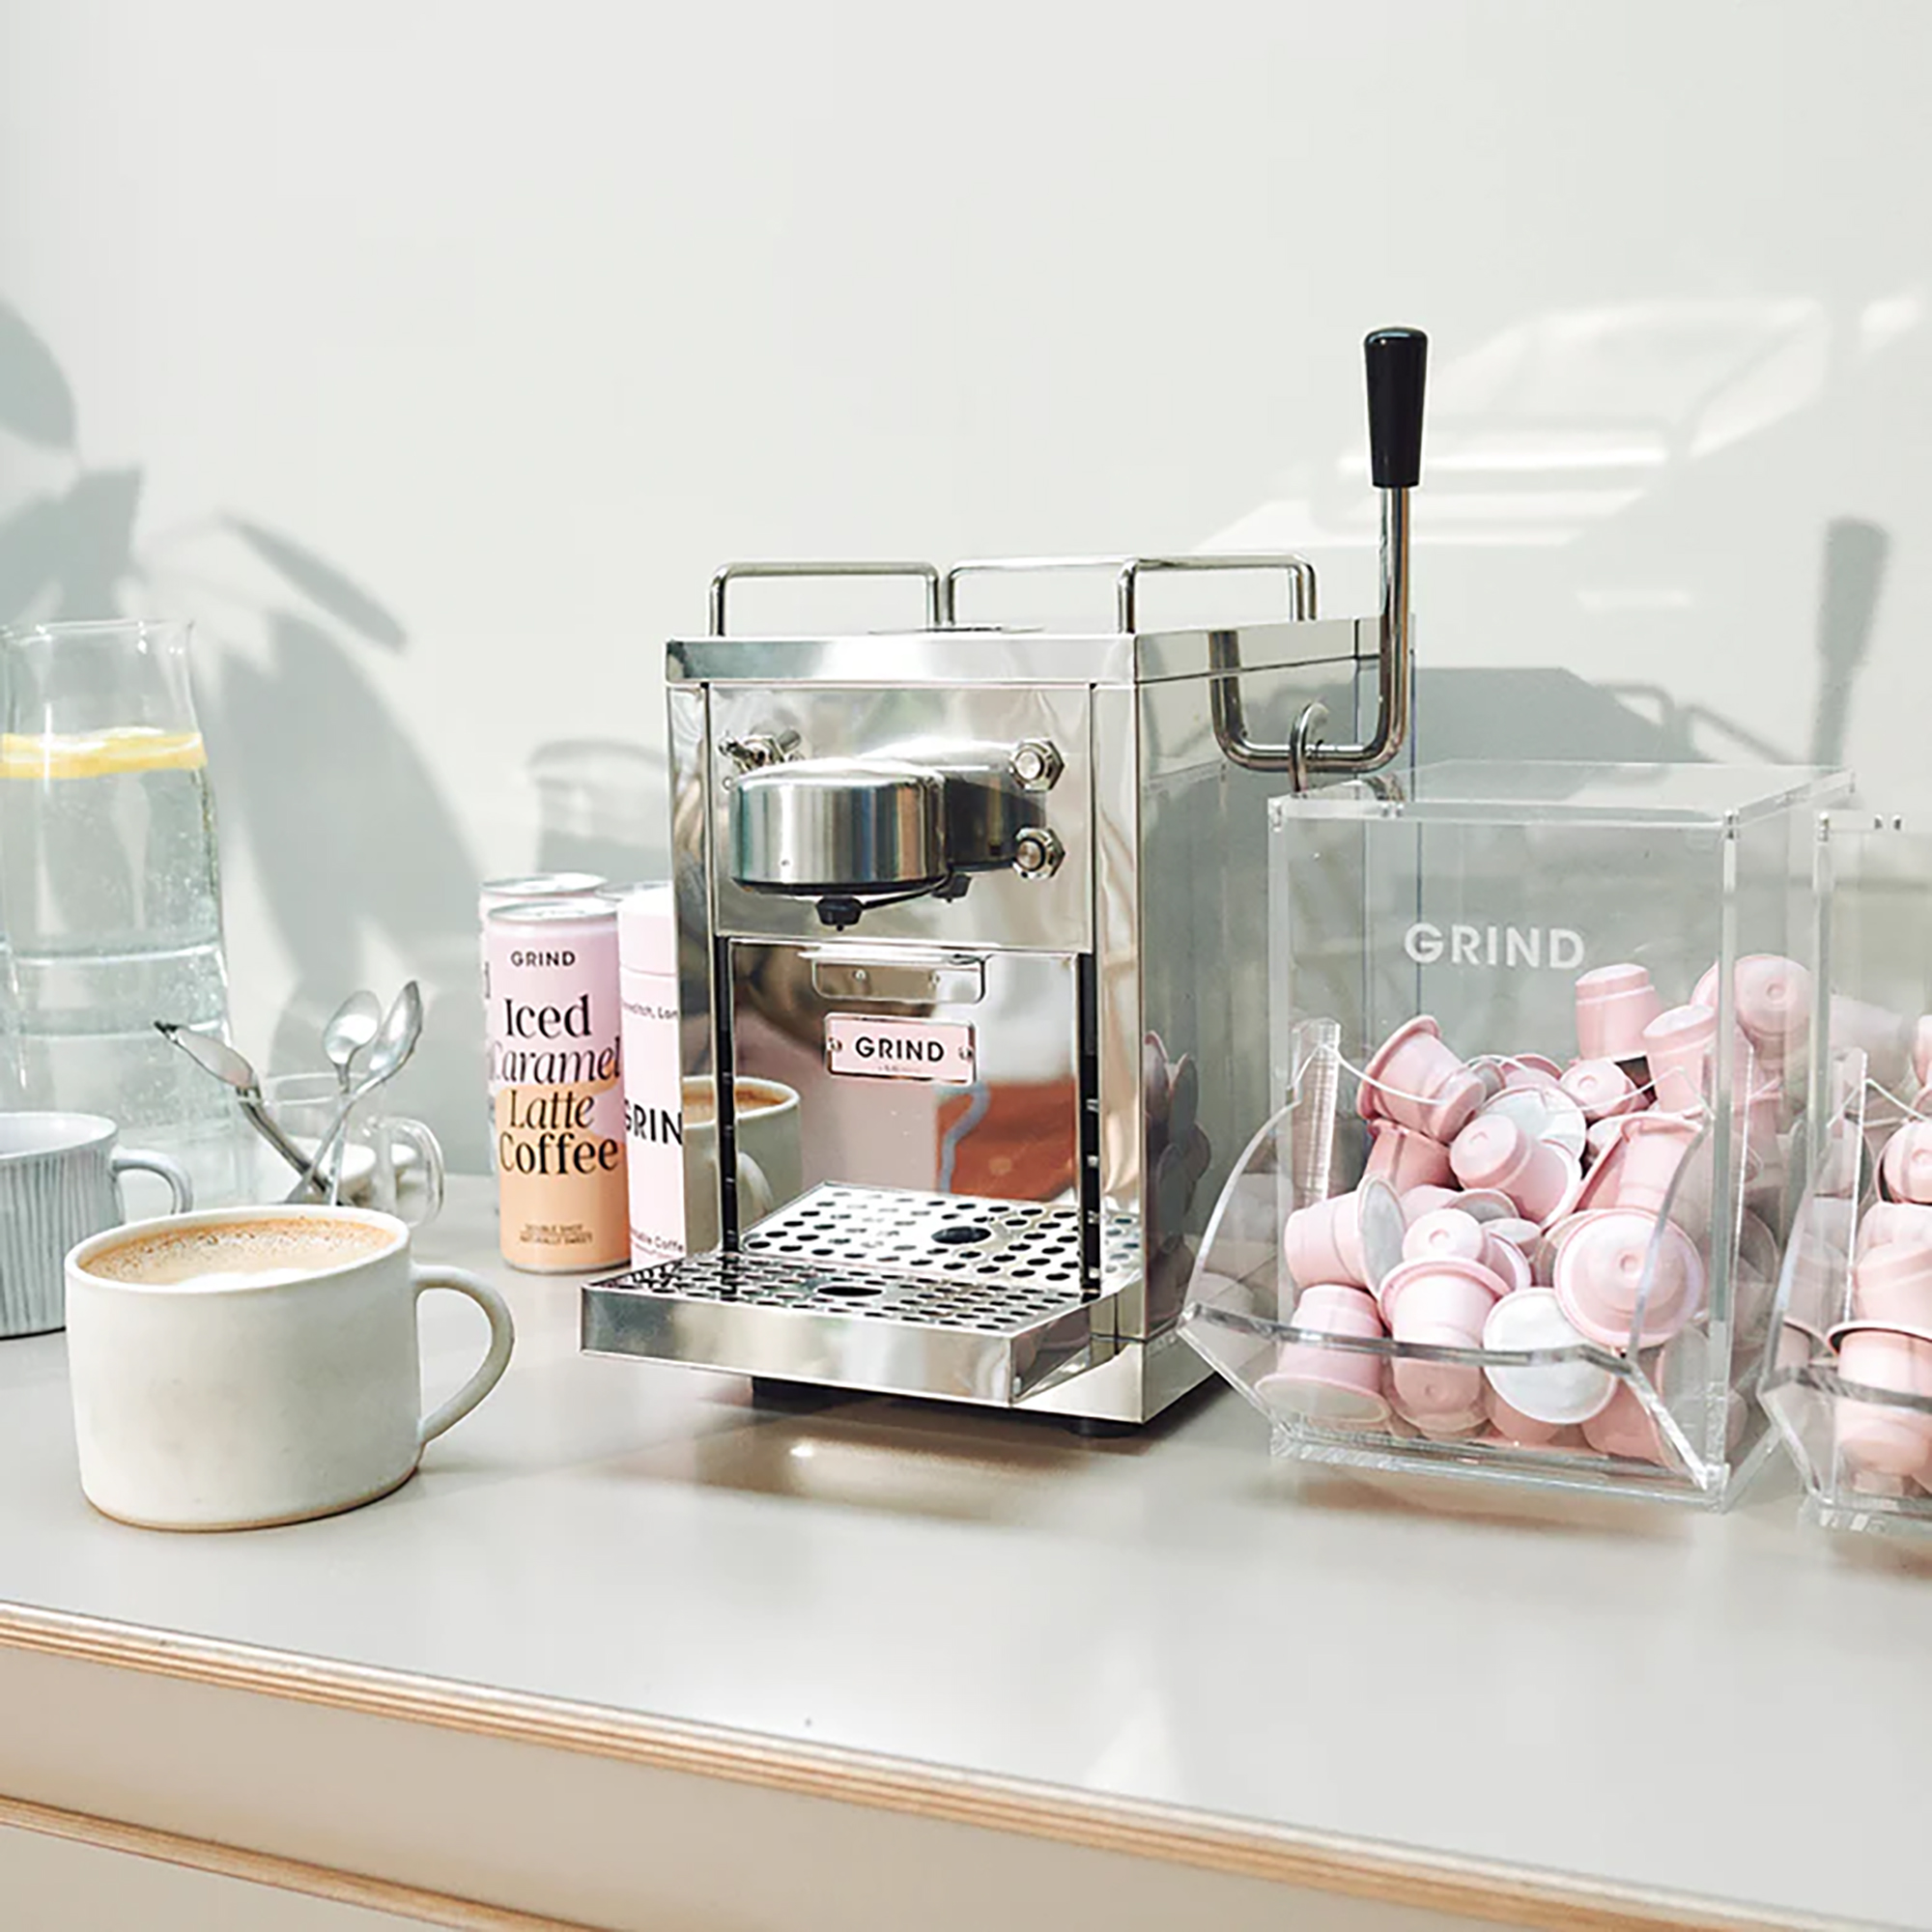 This millennial pink coffee machine is a kitchen must-have